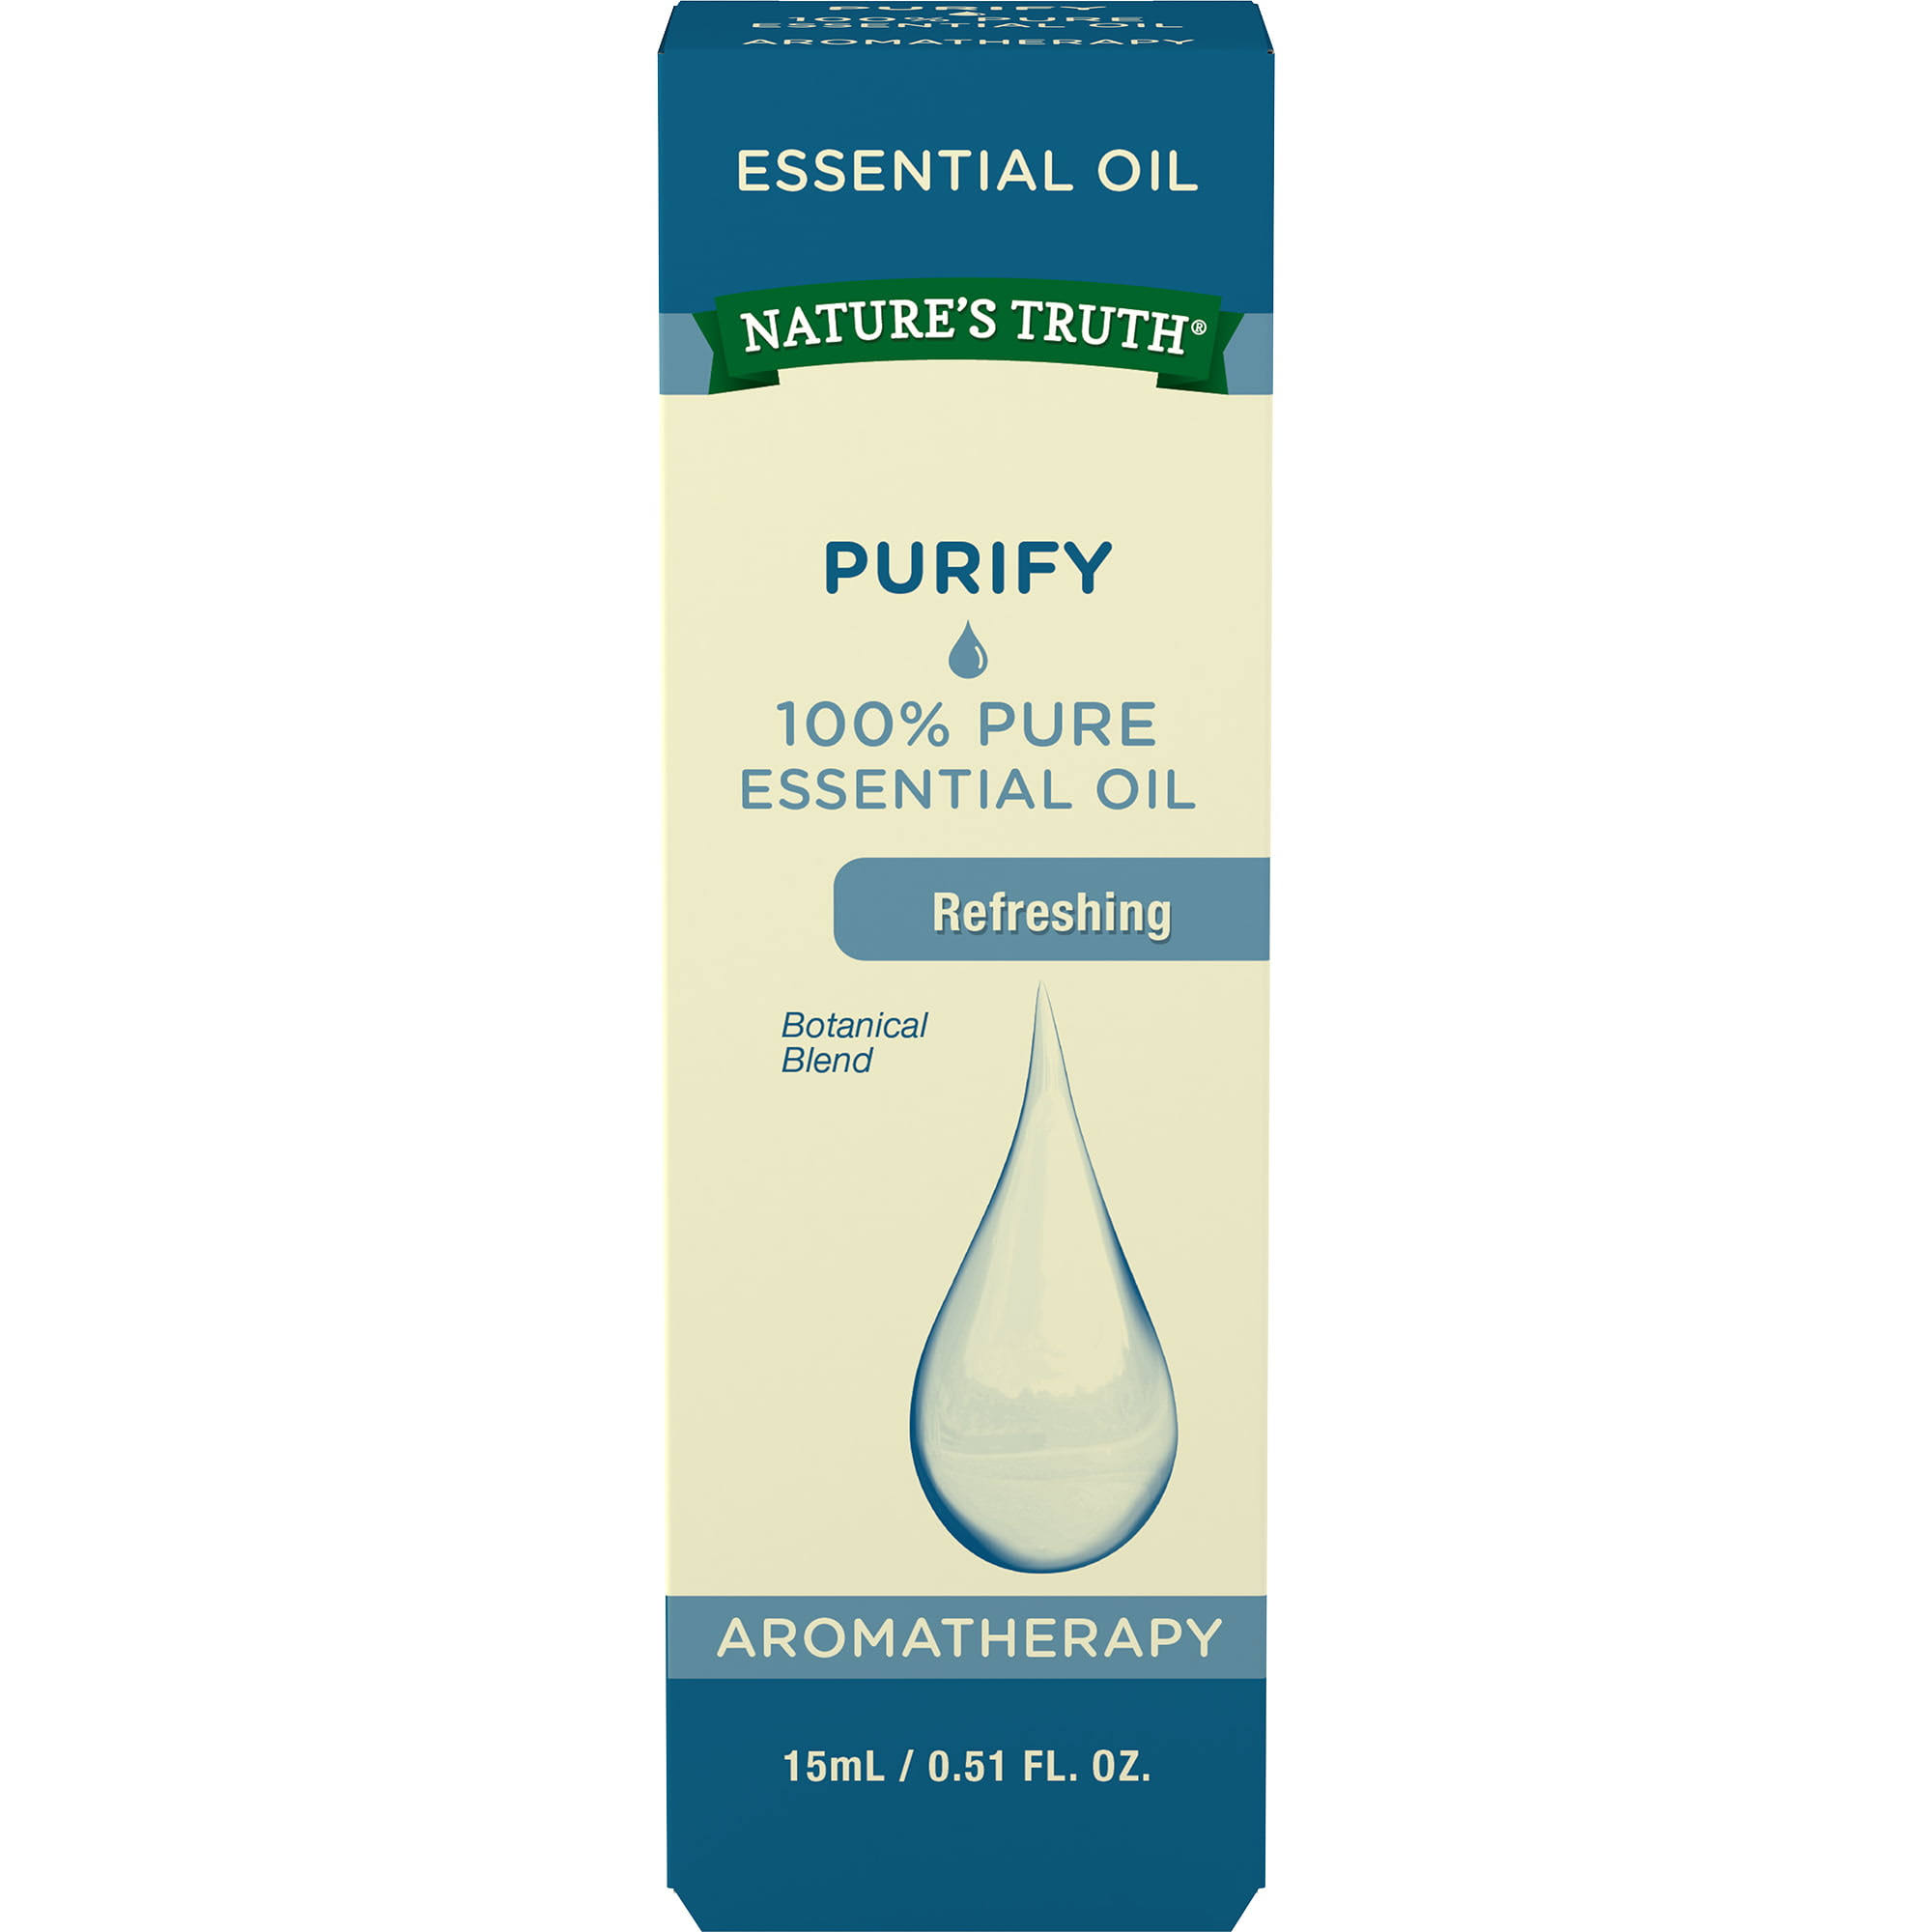 Nature's Truth Purify 100% Pure Essential Oil - 15ml